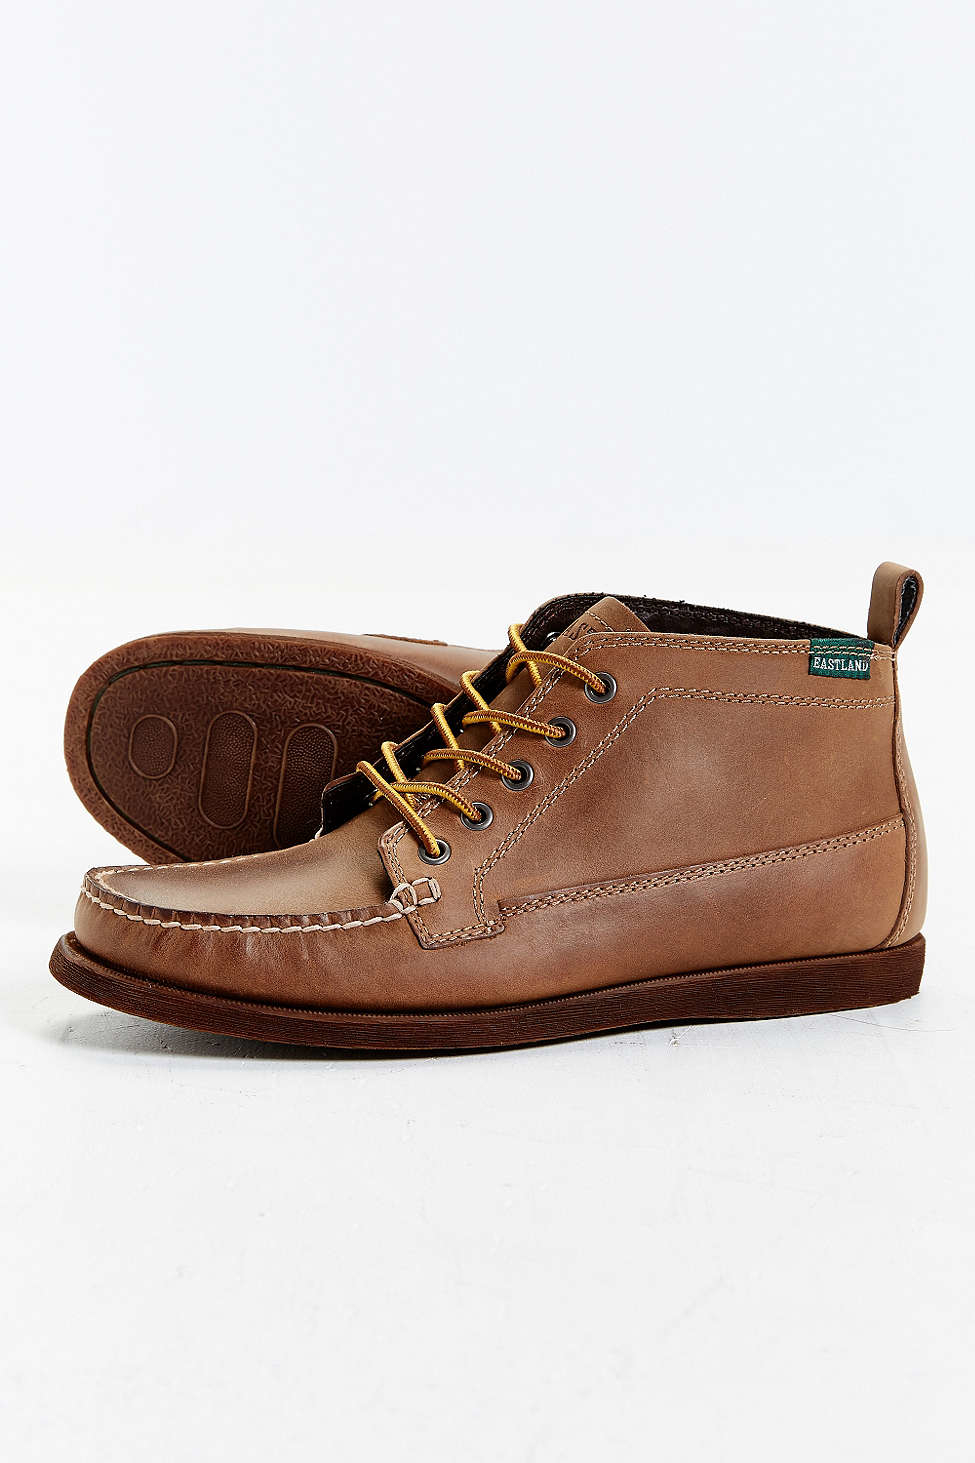 Eastland Leather Camp Moc Chukka Boot in Tan (Brown) for Men - Lyst